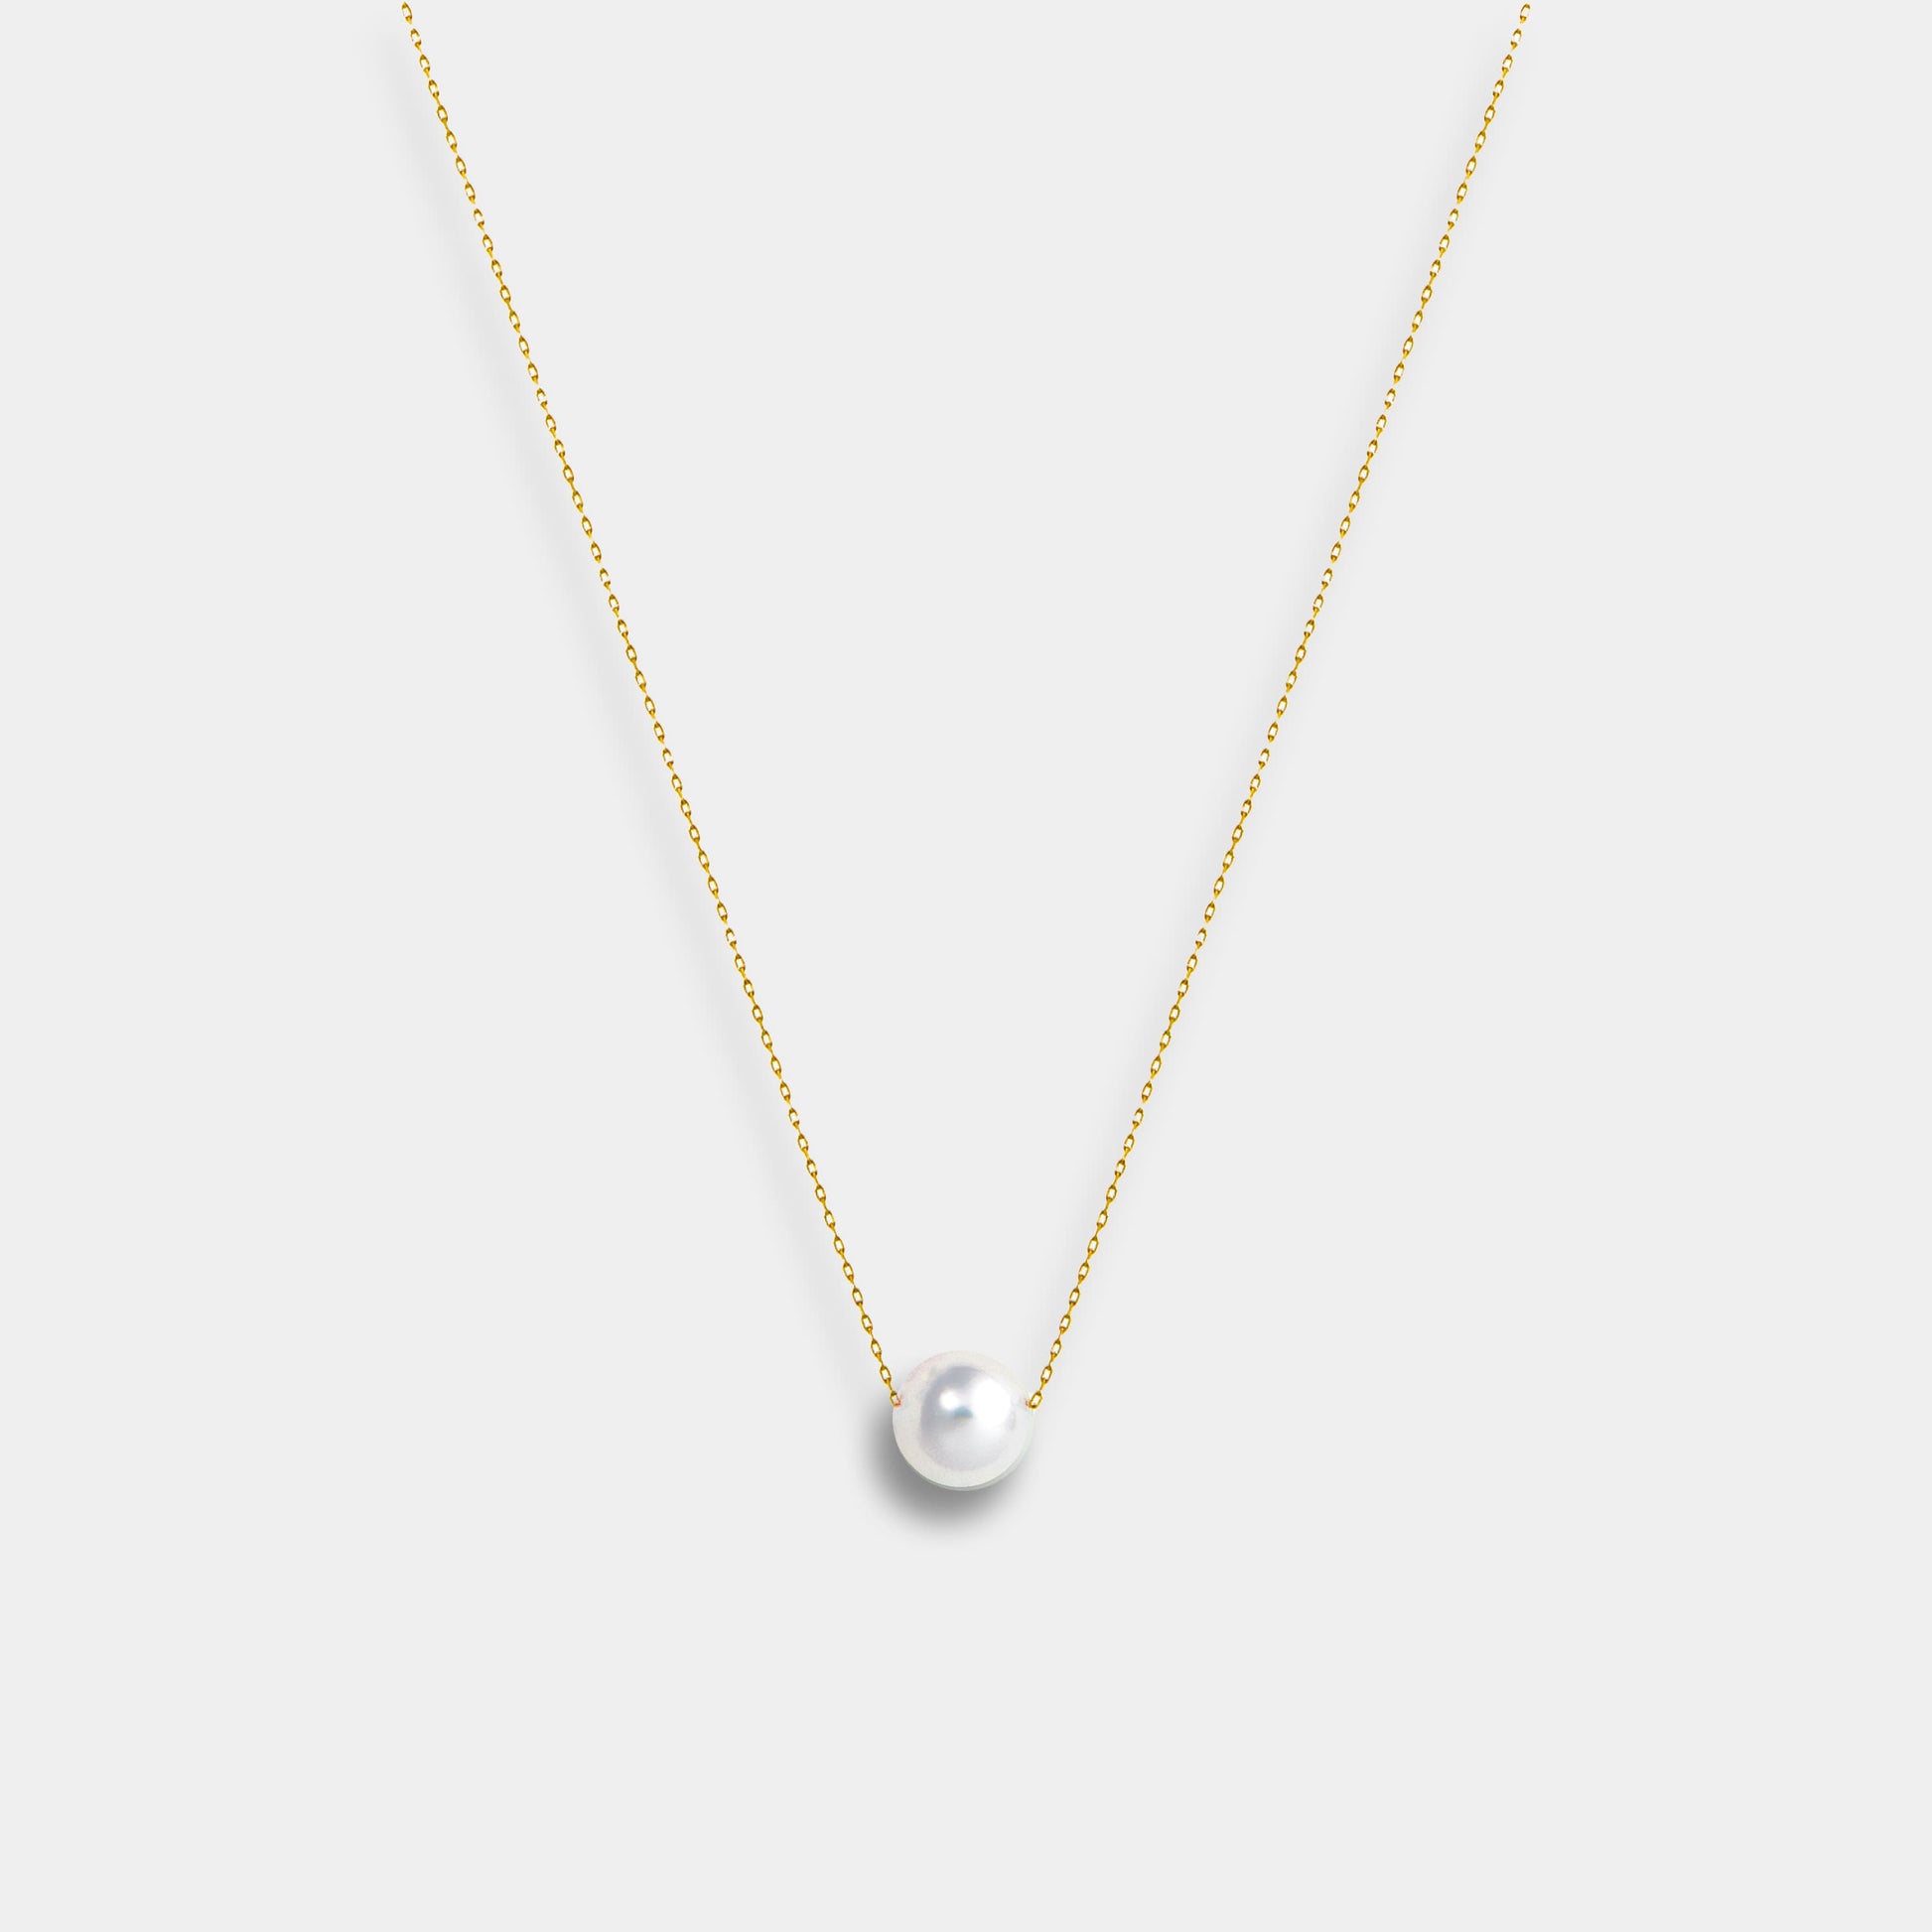 Enhance your elegance with a Floating Akoya Necklace, featuring a gold chain and a stunning pearl pendant.